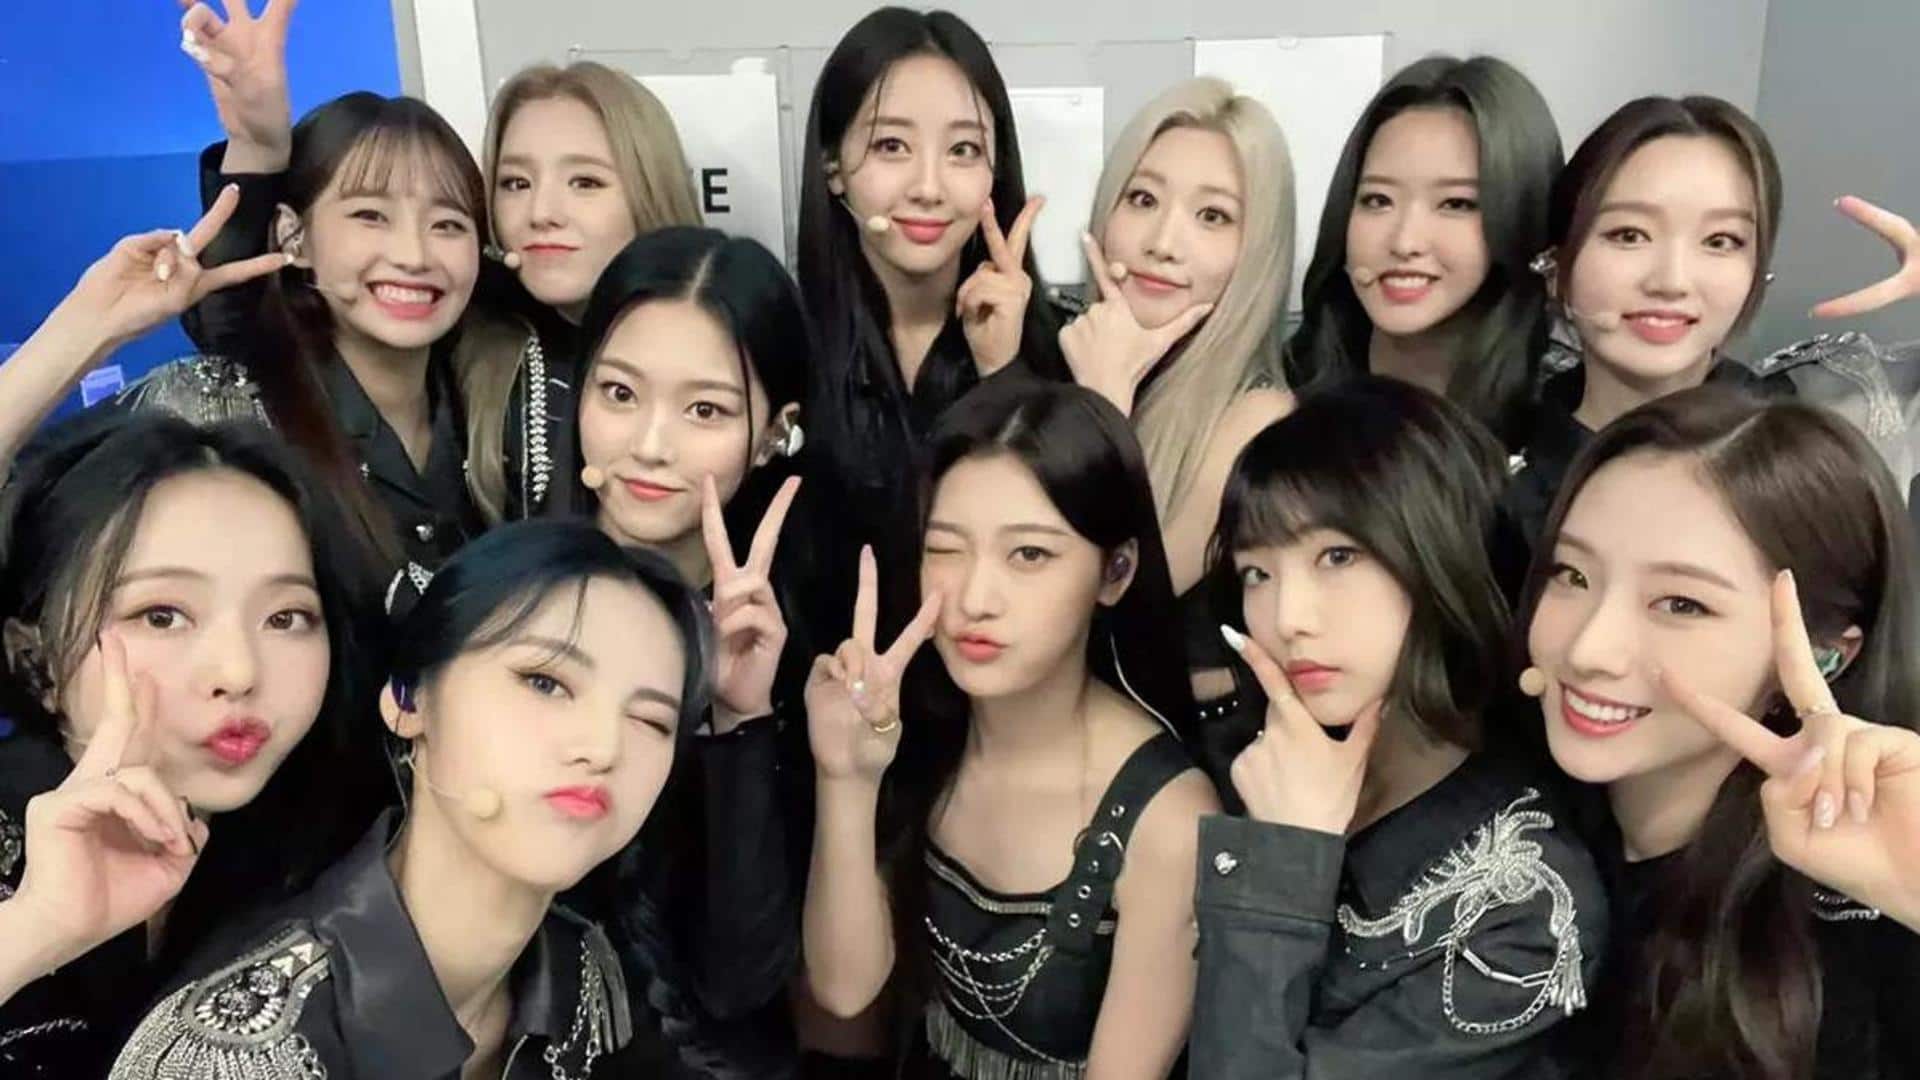 After lawsuit win, all 12 LOONA members are now free